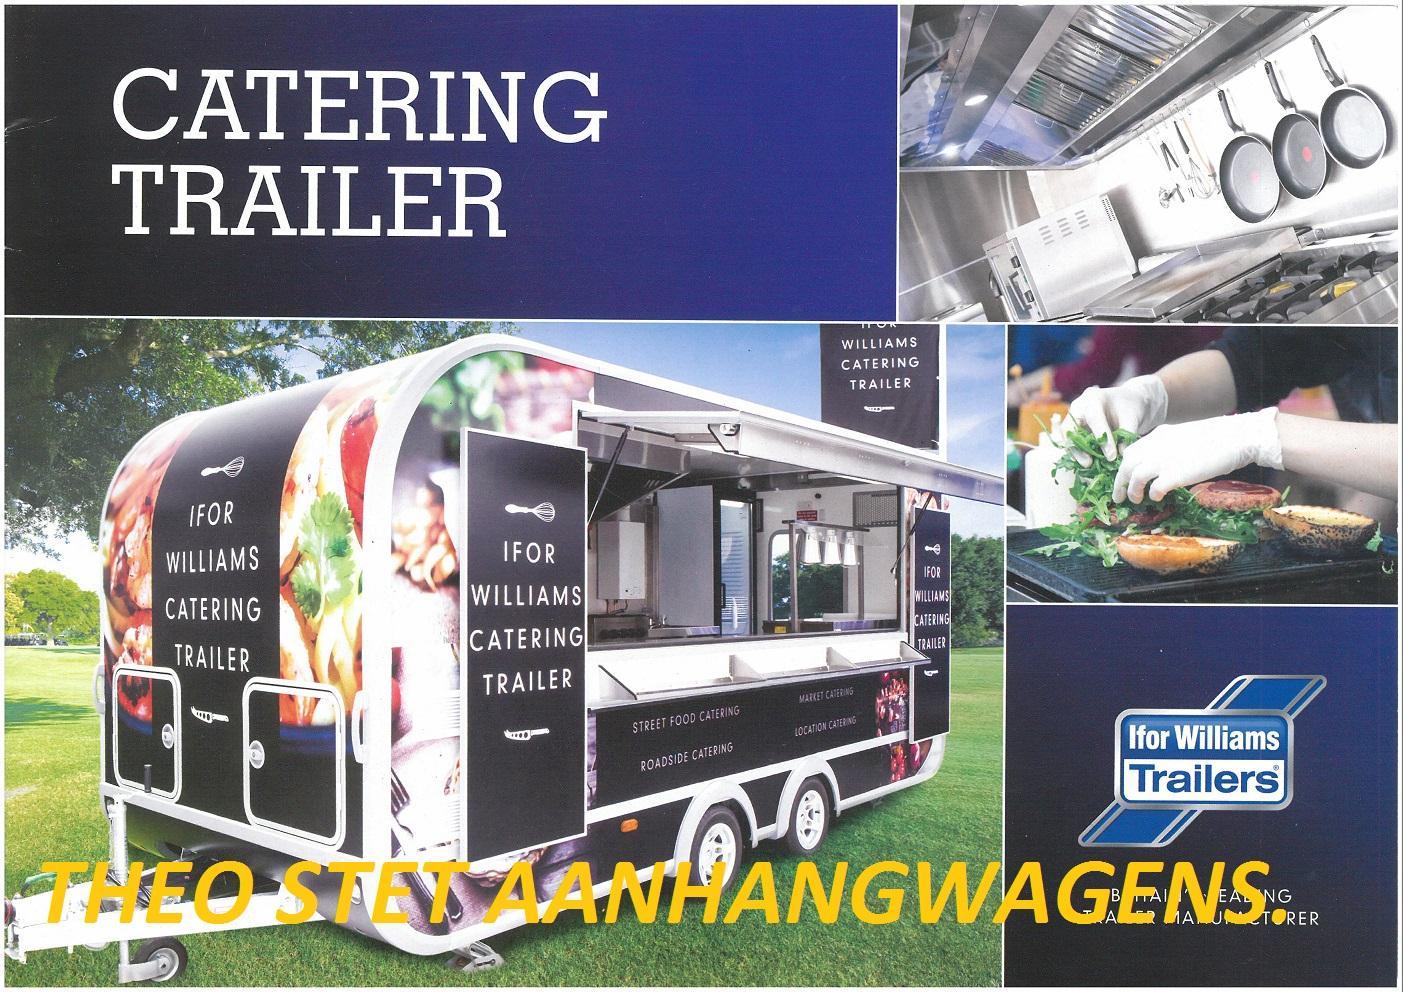 IFOR Williams Trailer Catering Trailer